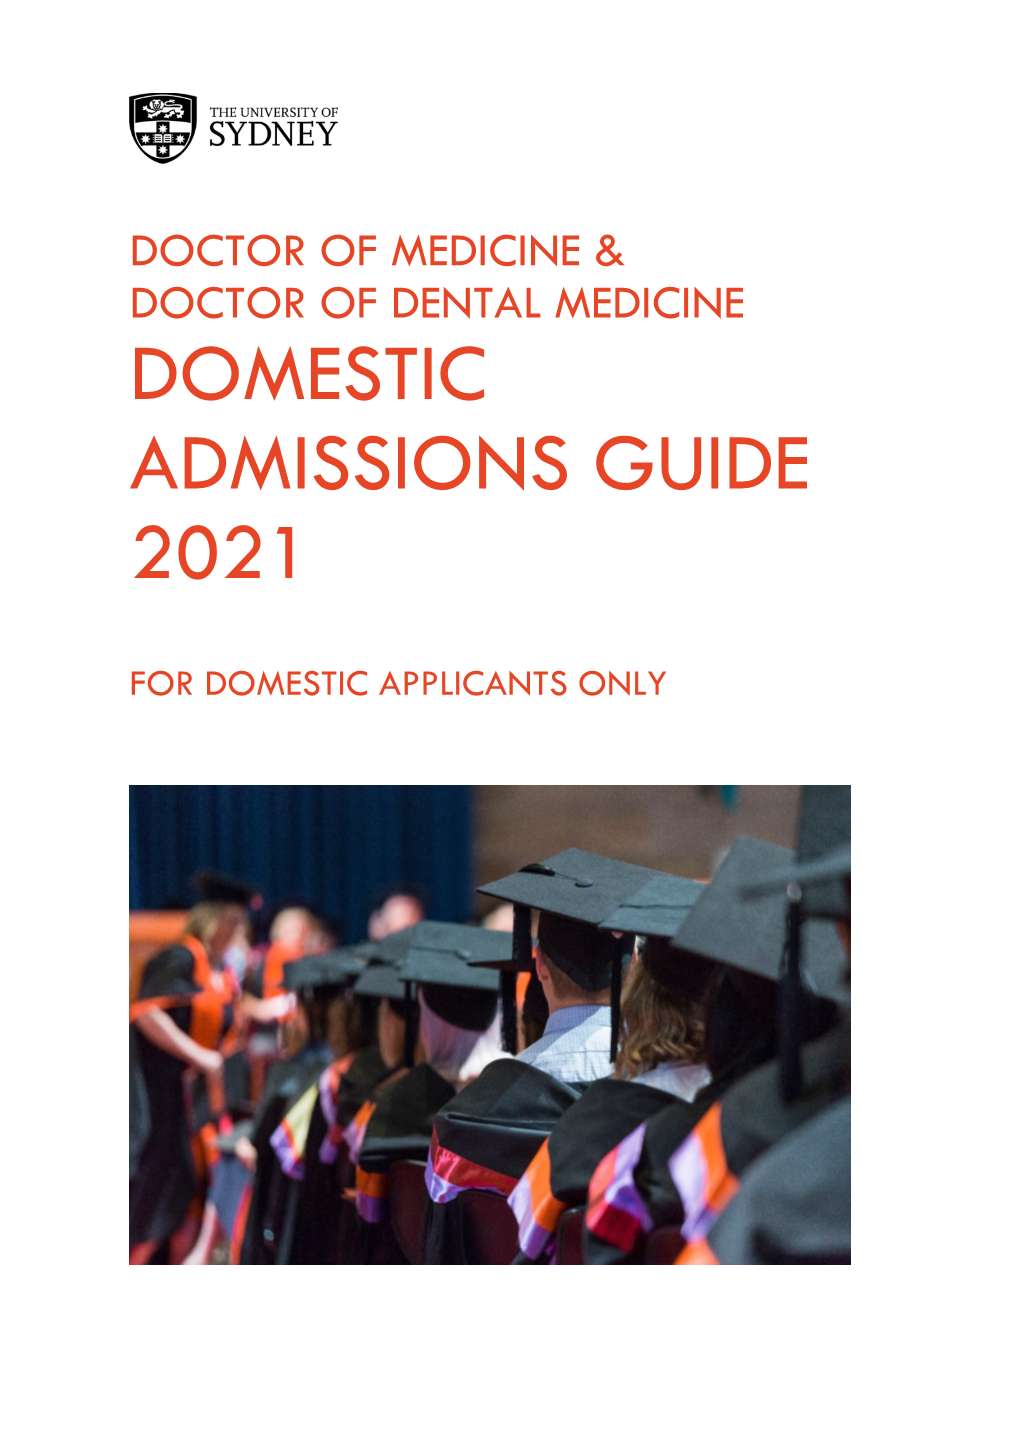 2021 Domestic Admissions Guide